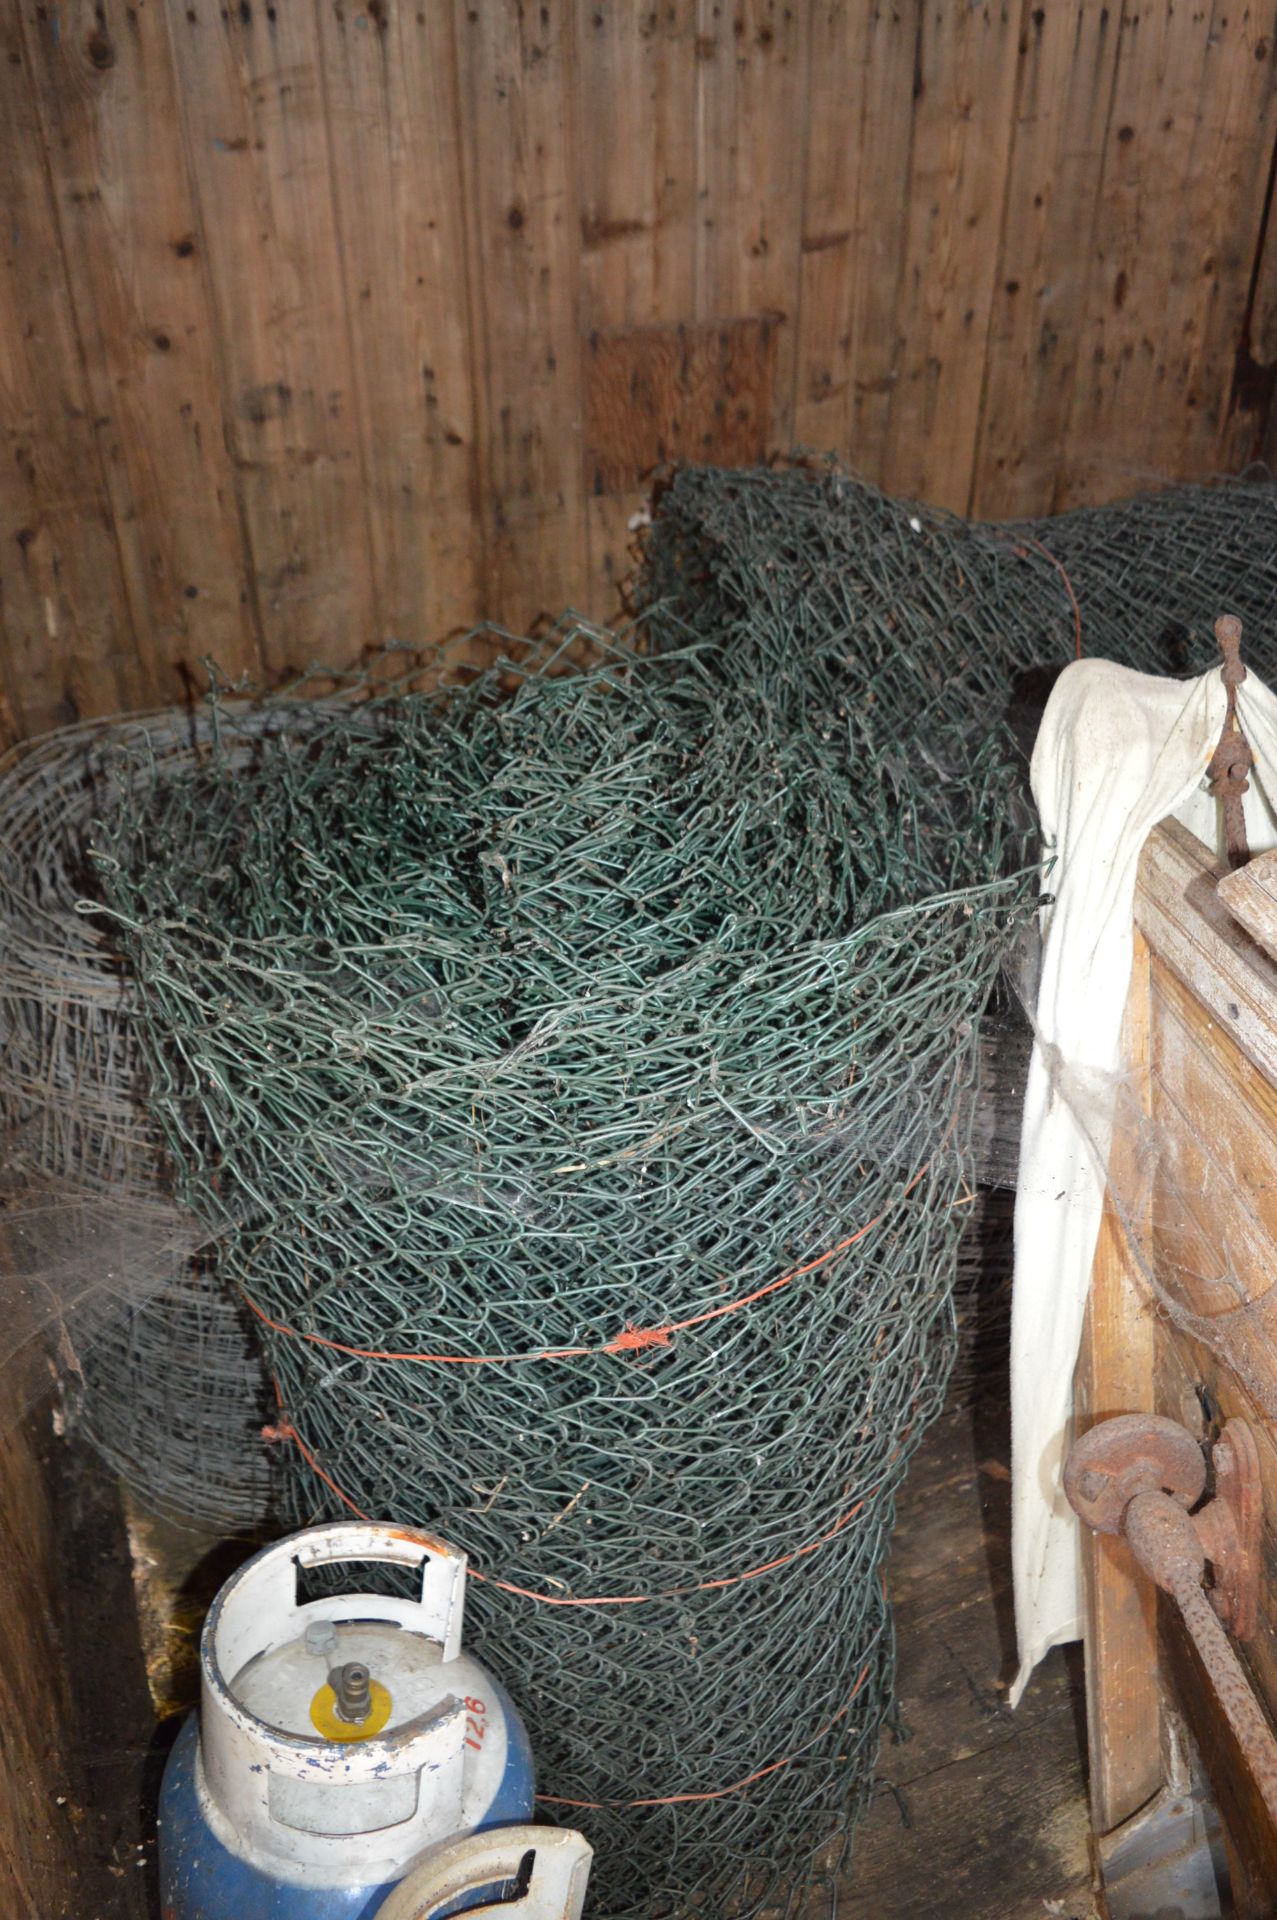 Sheep and Other Netting with Posts